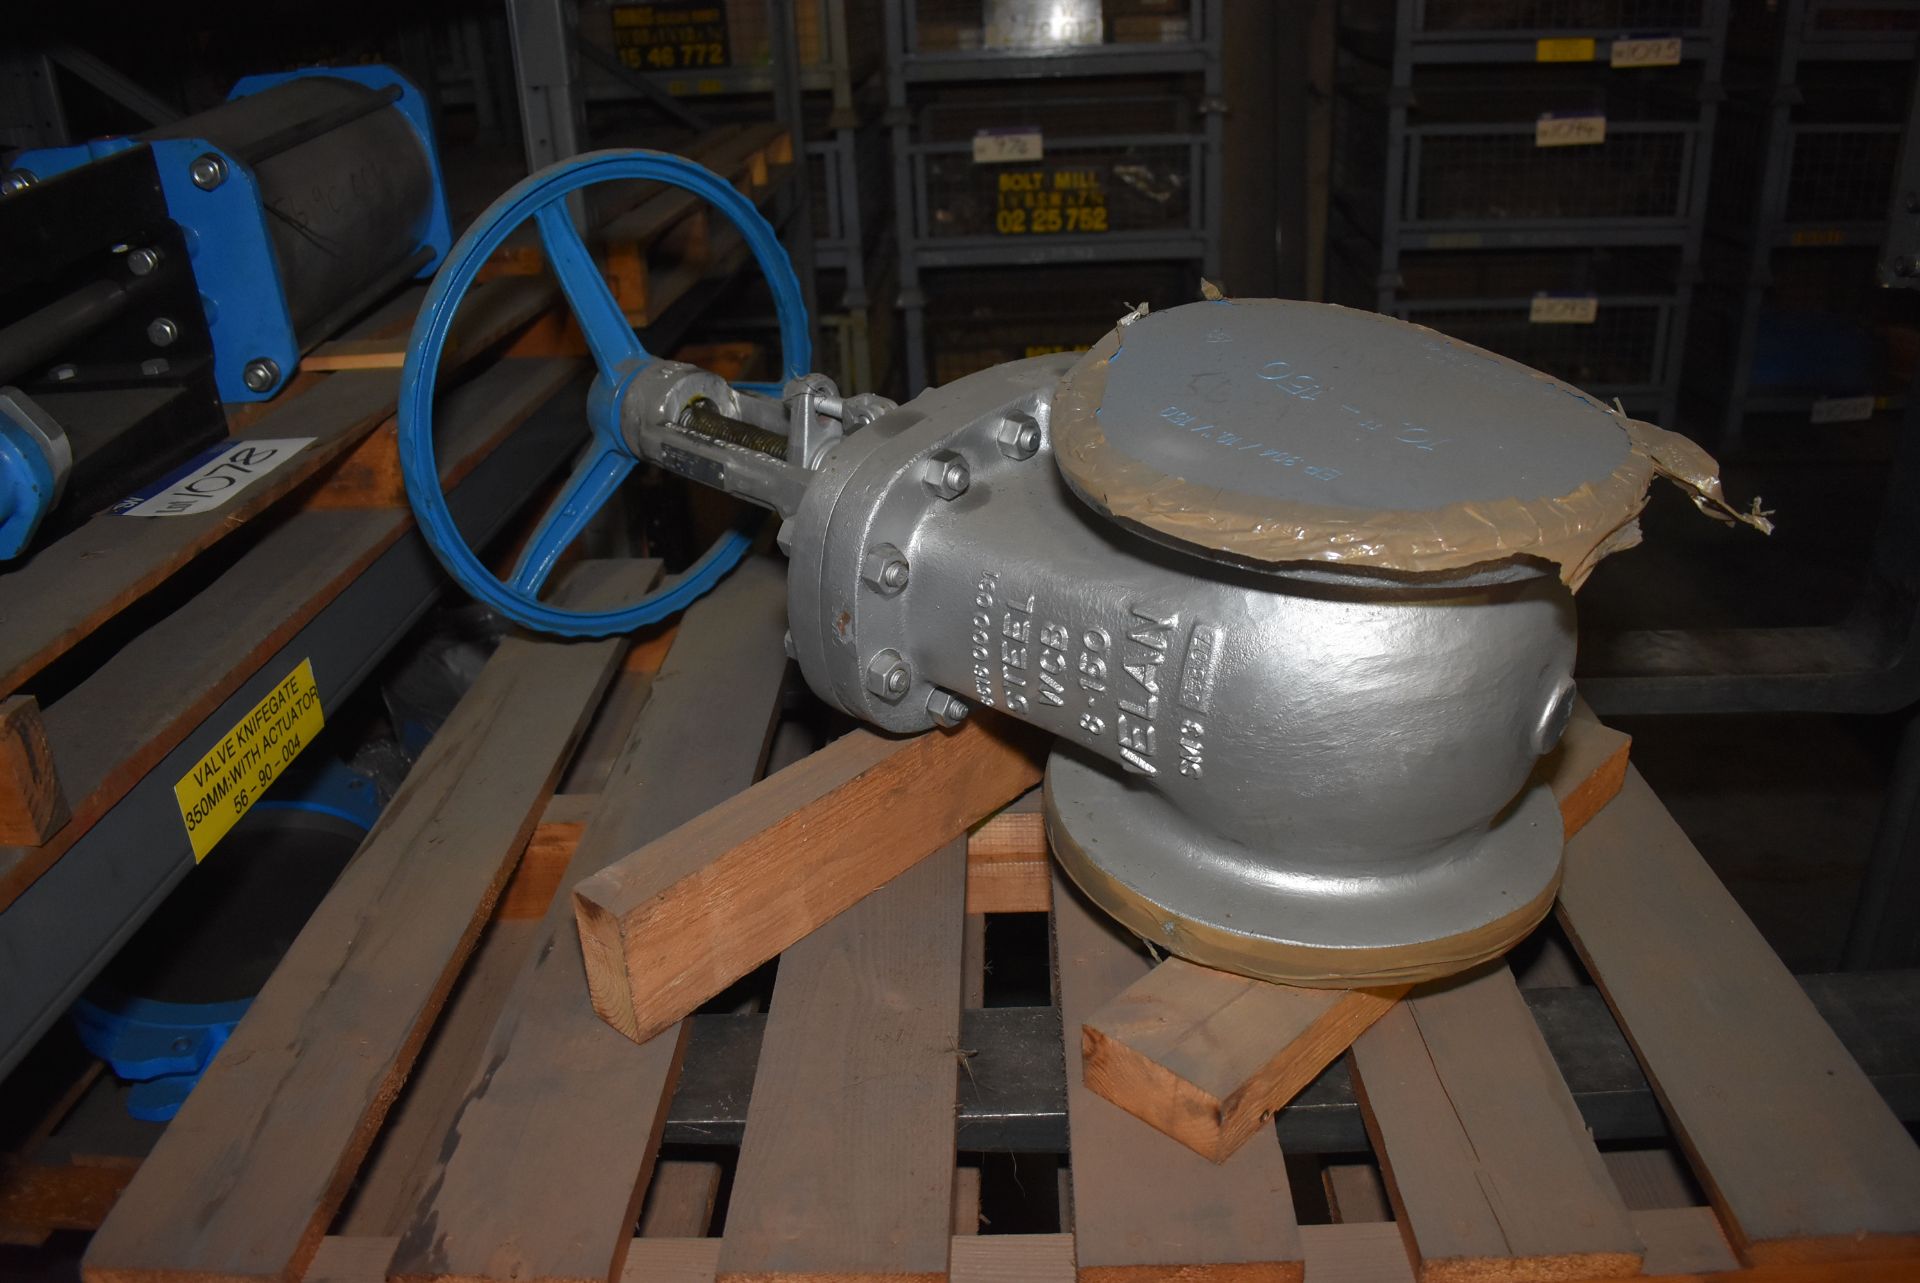 8in. Flanged Wedge Gate Valve (56-13-700) MS-MP104 (please note this lot is part of combination